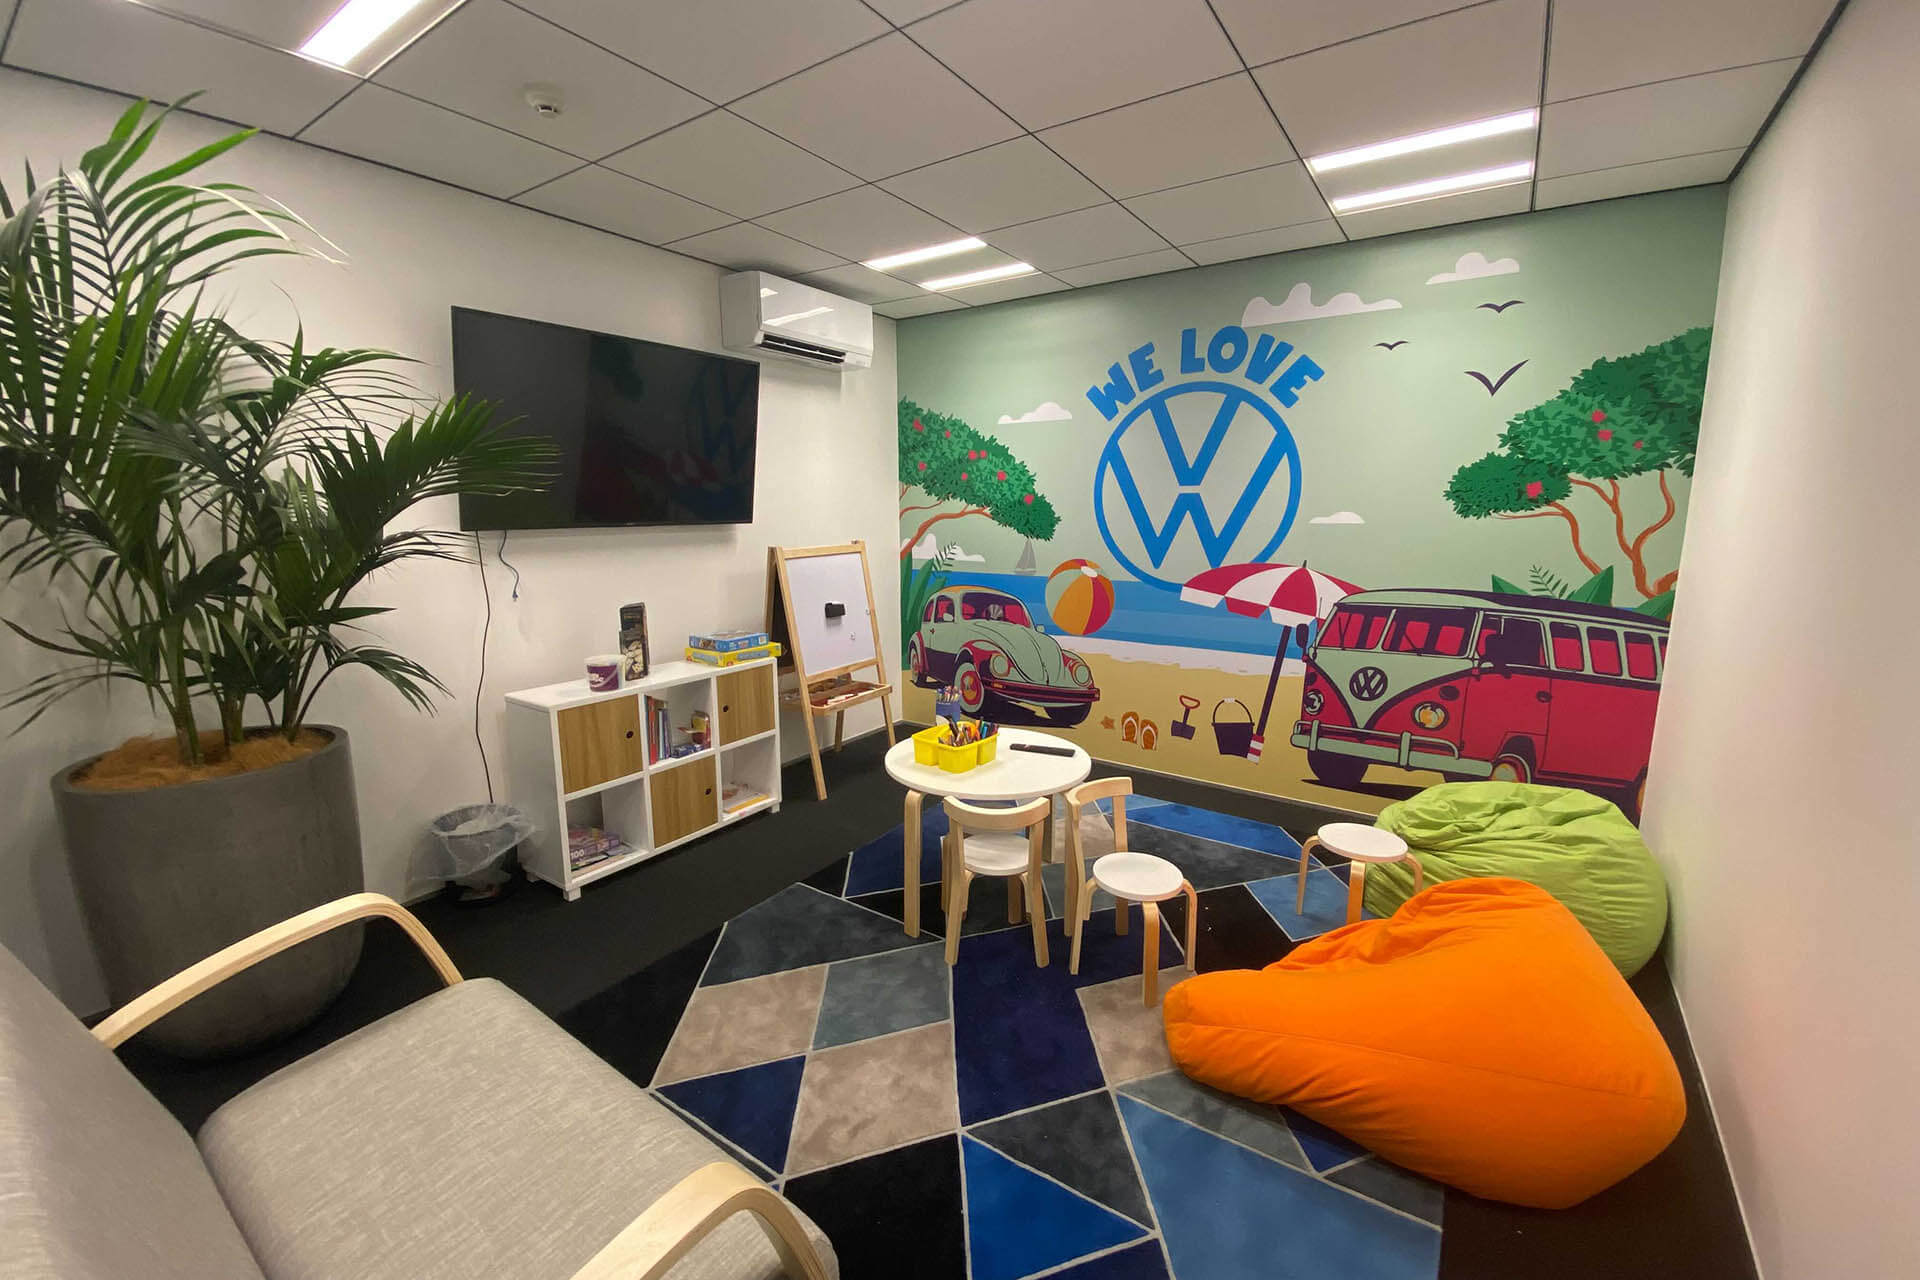 We noticed our customers often had young VW lovers with them while they were waiting for a service or shopping for a new car. So we created a space where the kids have fun, giving parents space to relax, work or focus on the details.